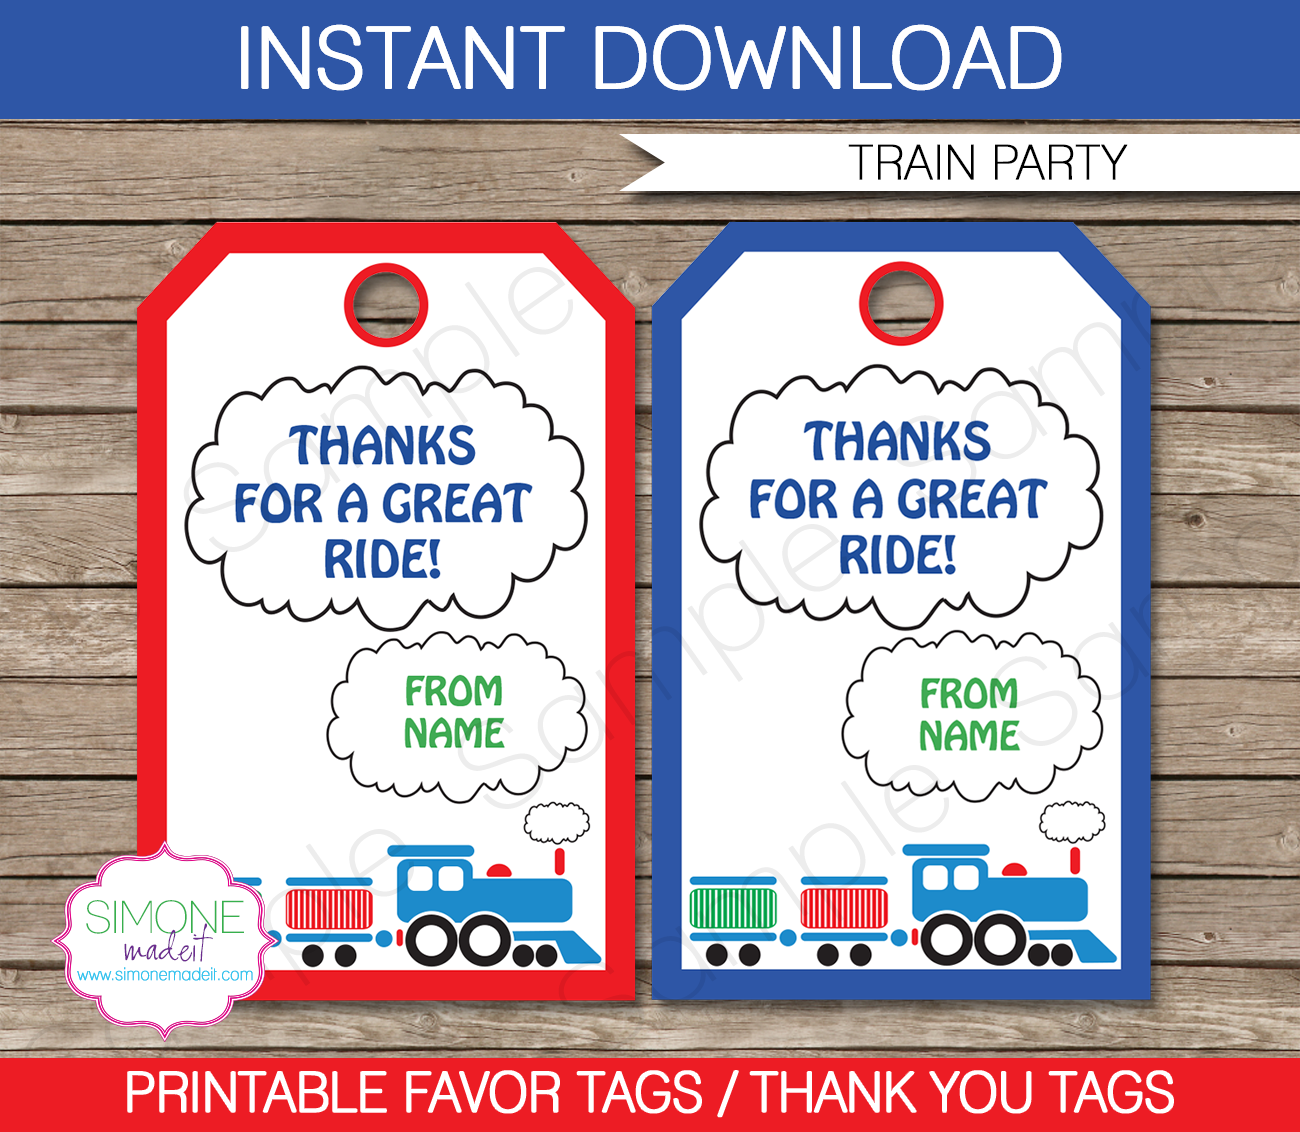 Printable Steam Train Party Favor Tags Template | Thank You Tags | Birthday Party | Editable DIY Template | $3.00 INSTANT DOWNLOAD via SIMONEmadeit.com